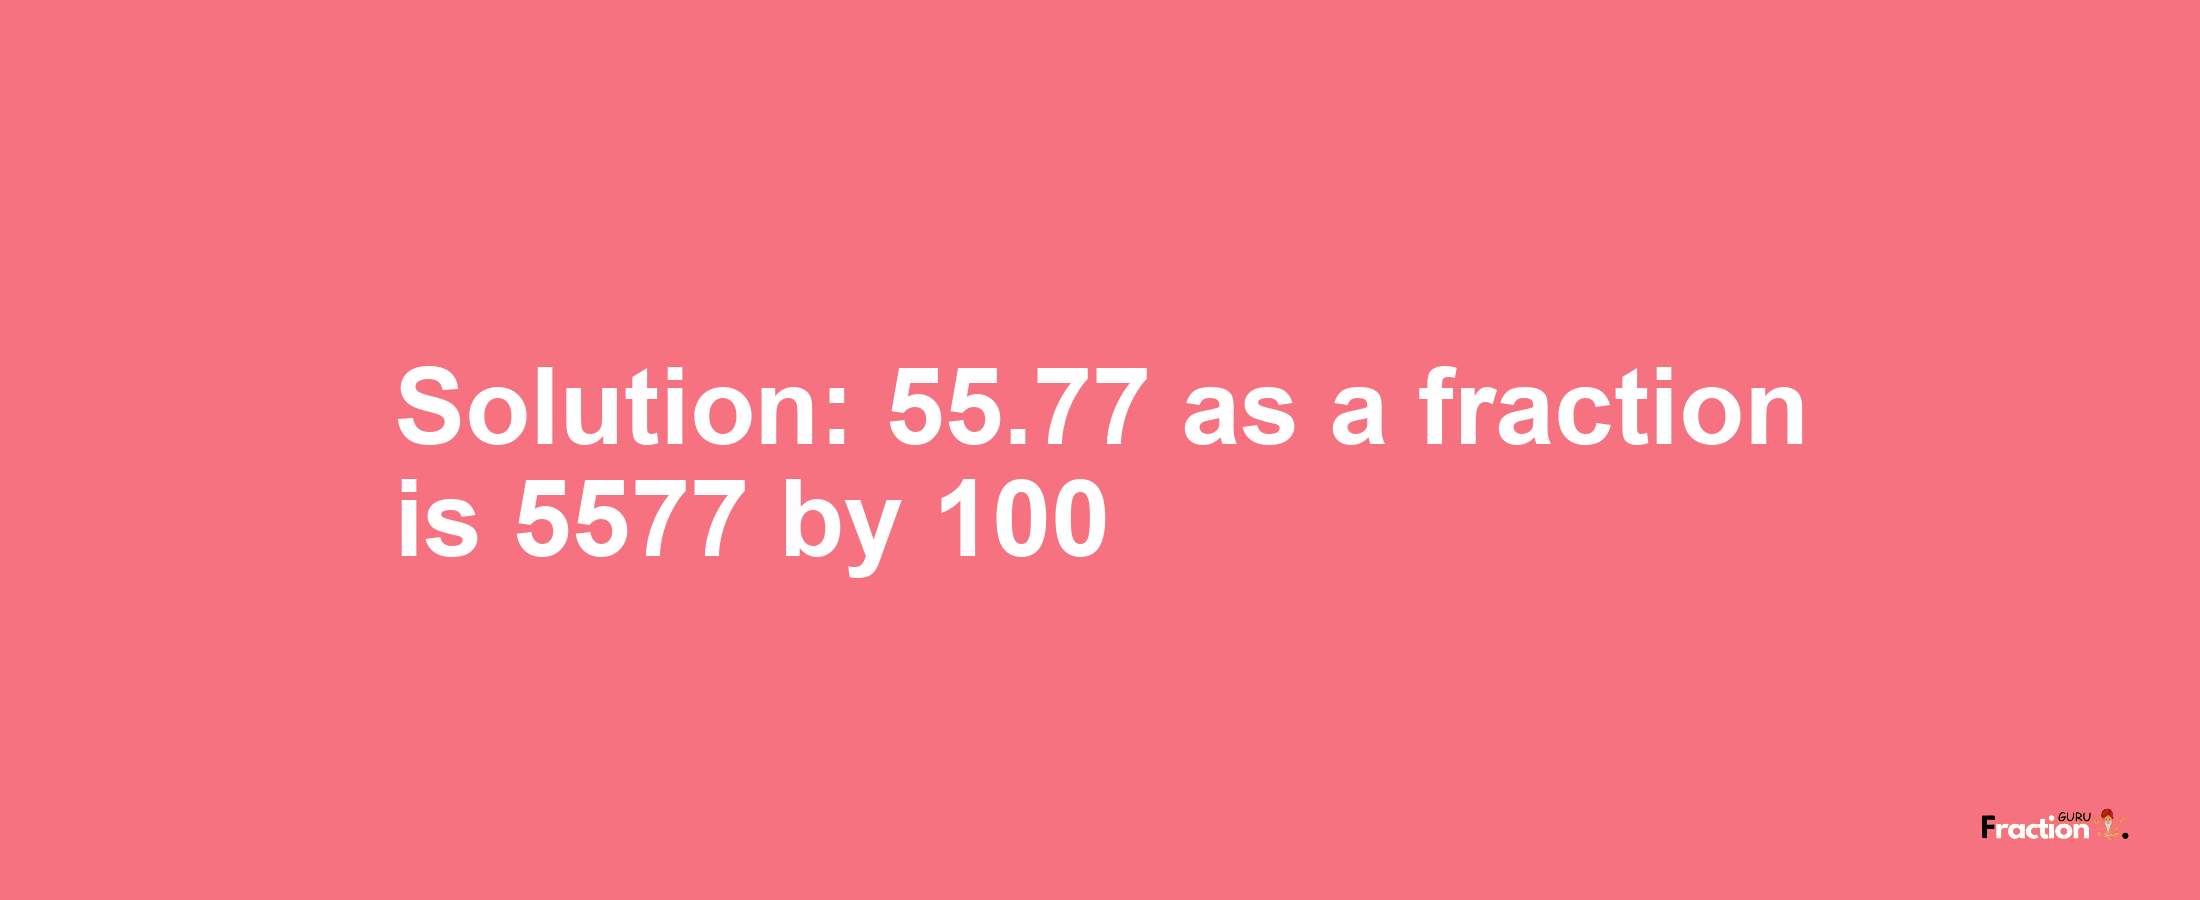 Solution:55.77 as a fraction is 5577/100